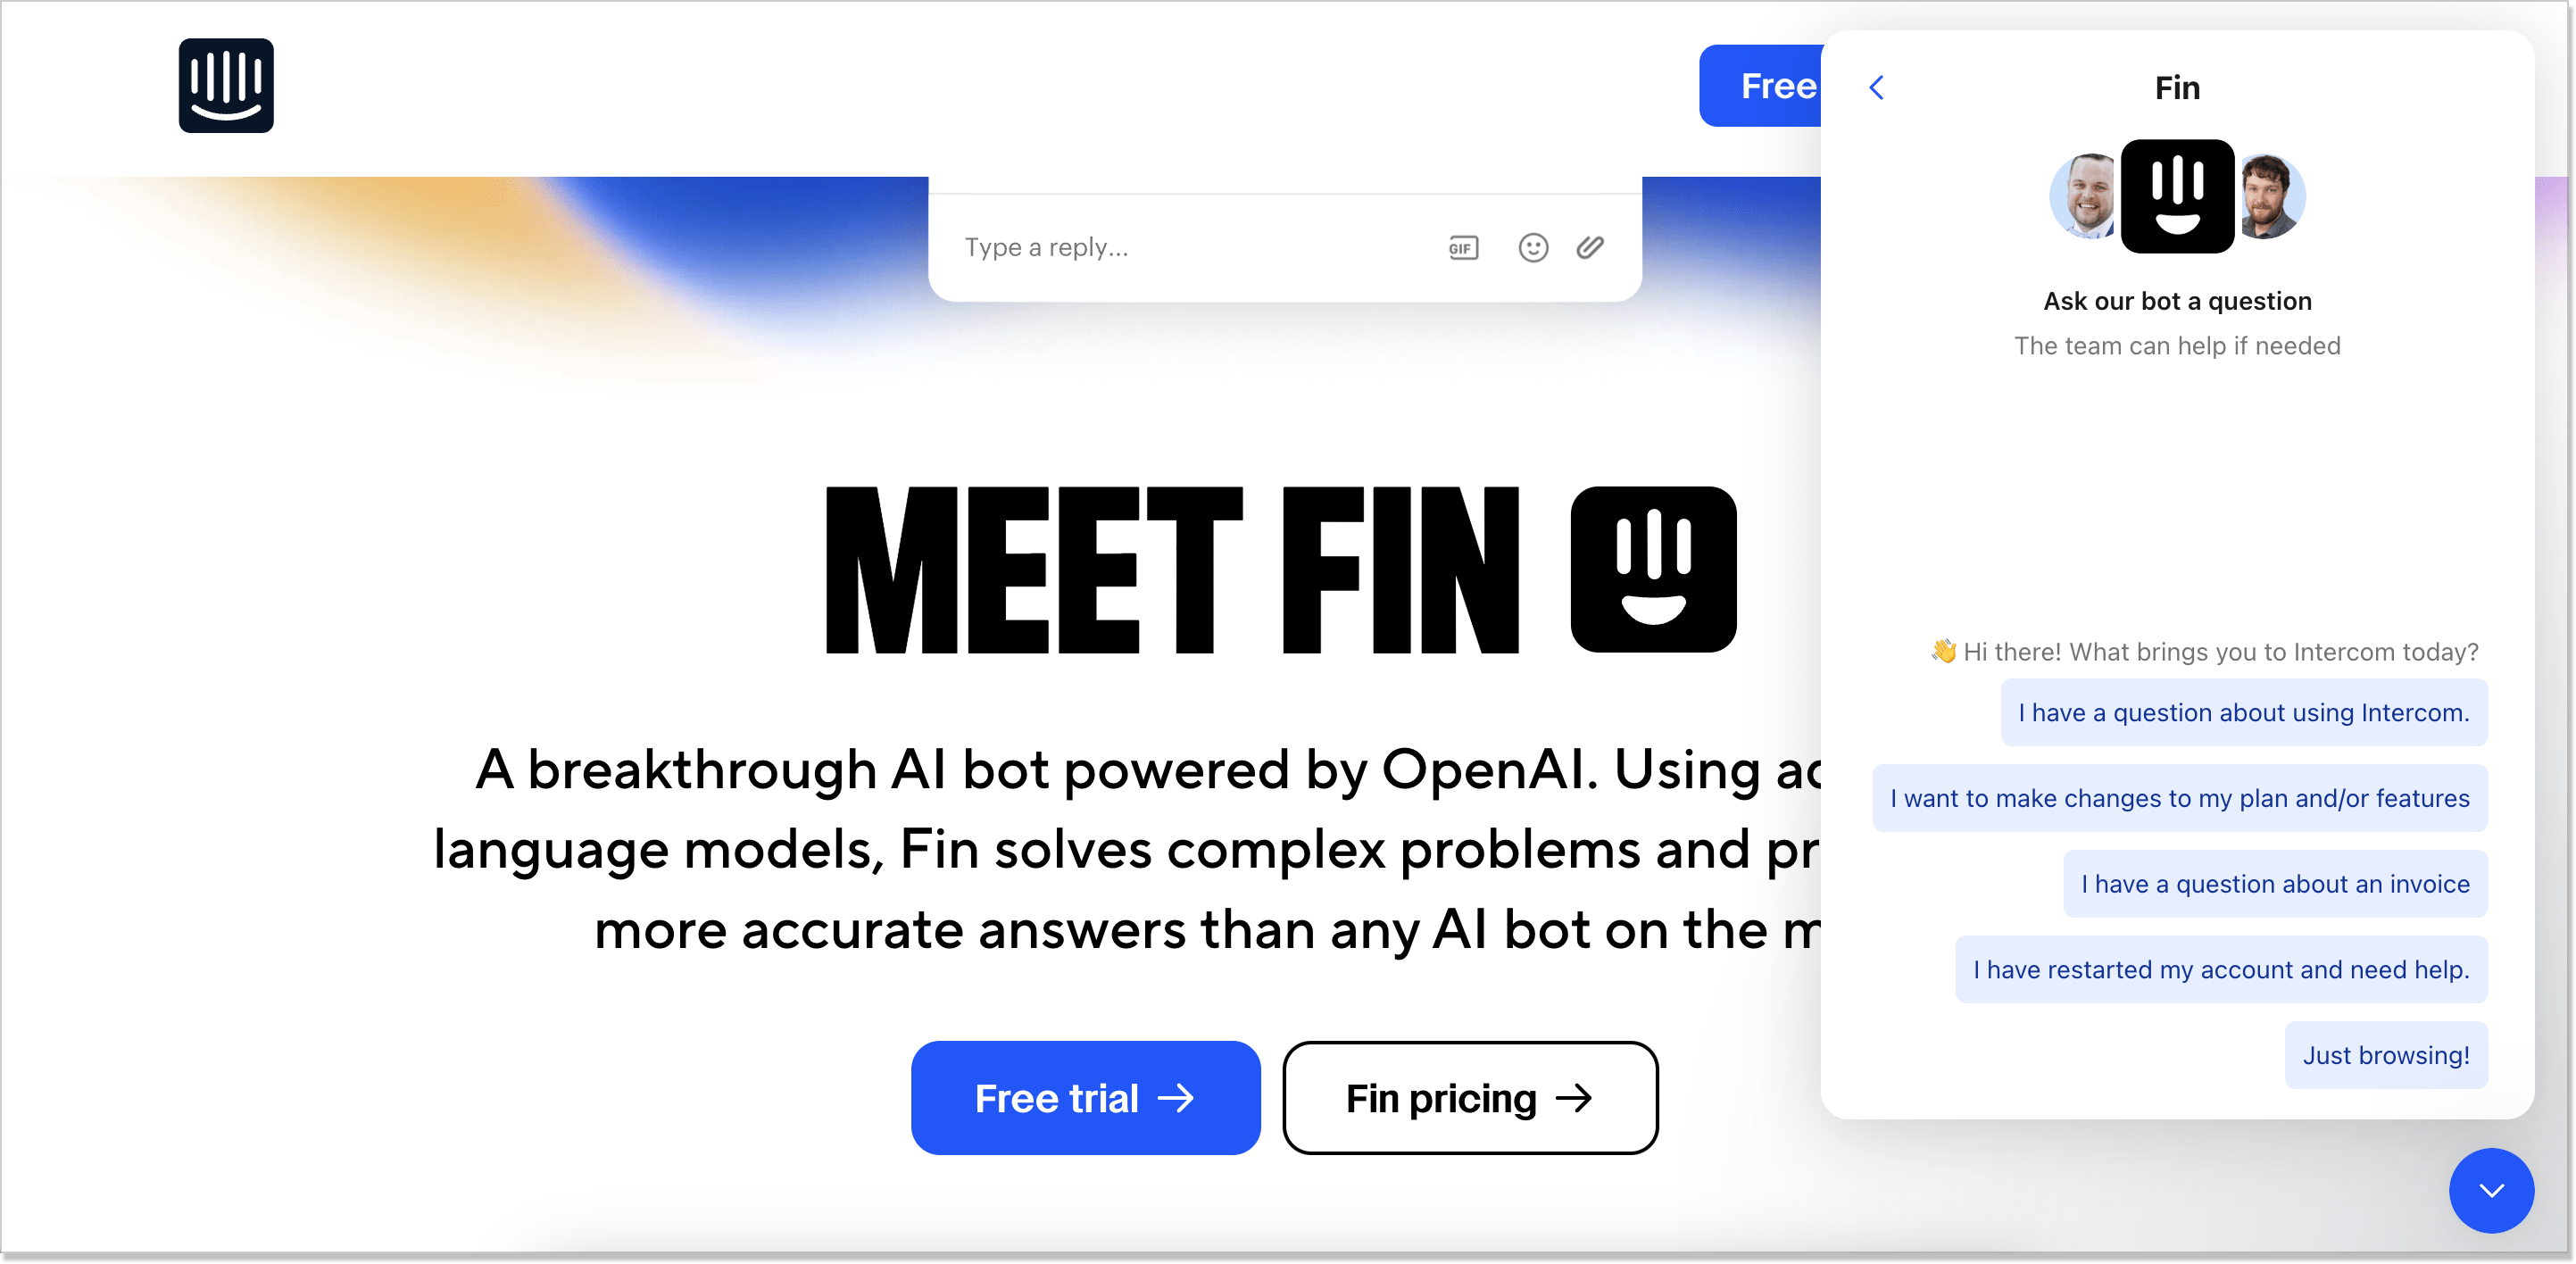 Fin landing page